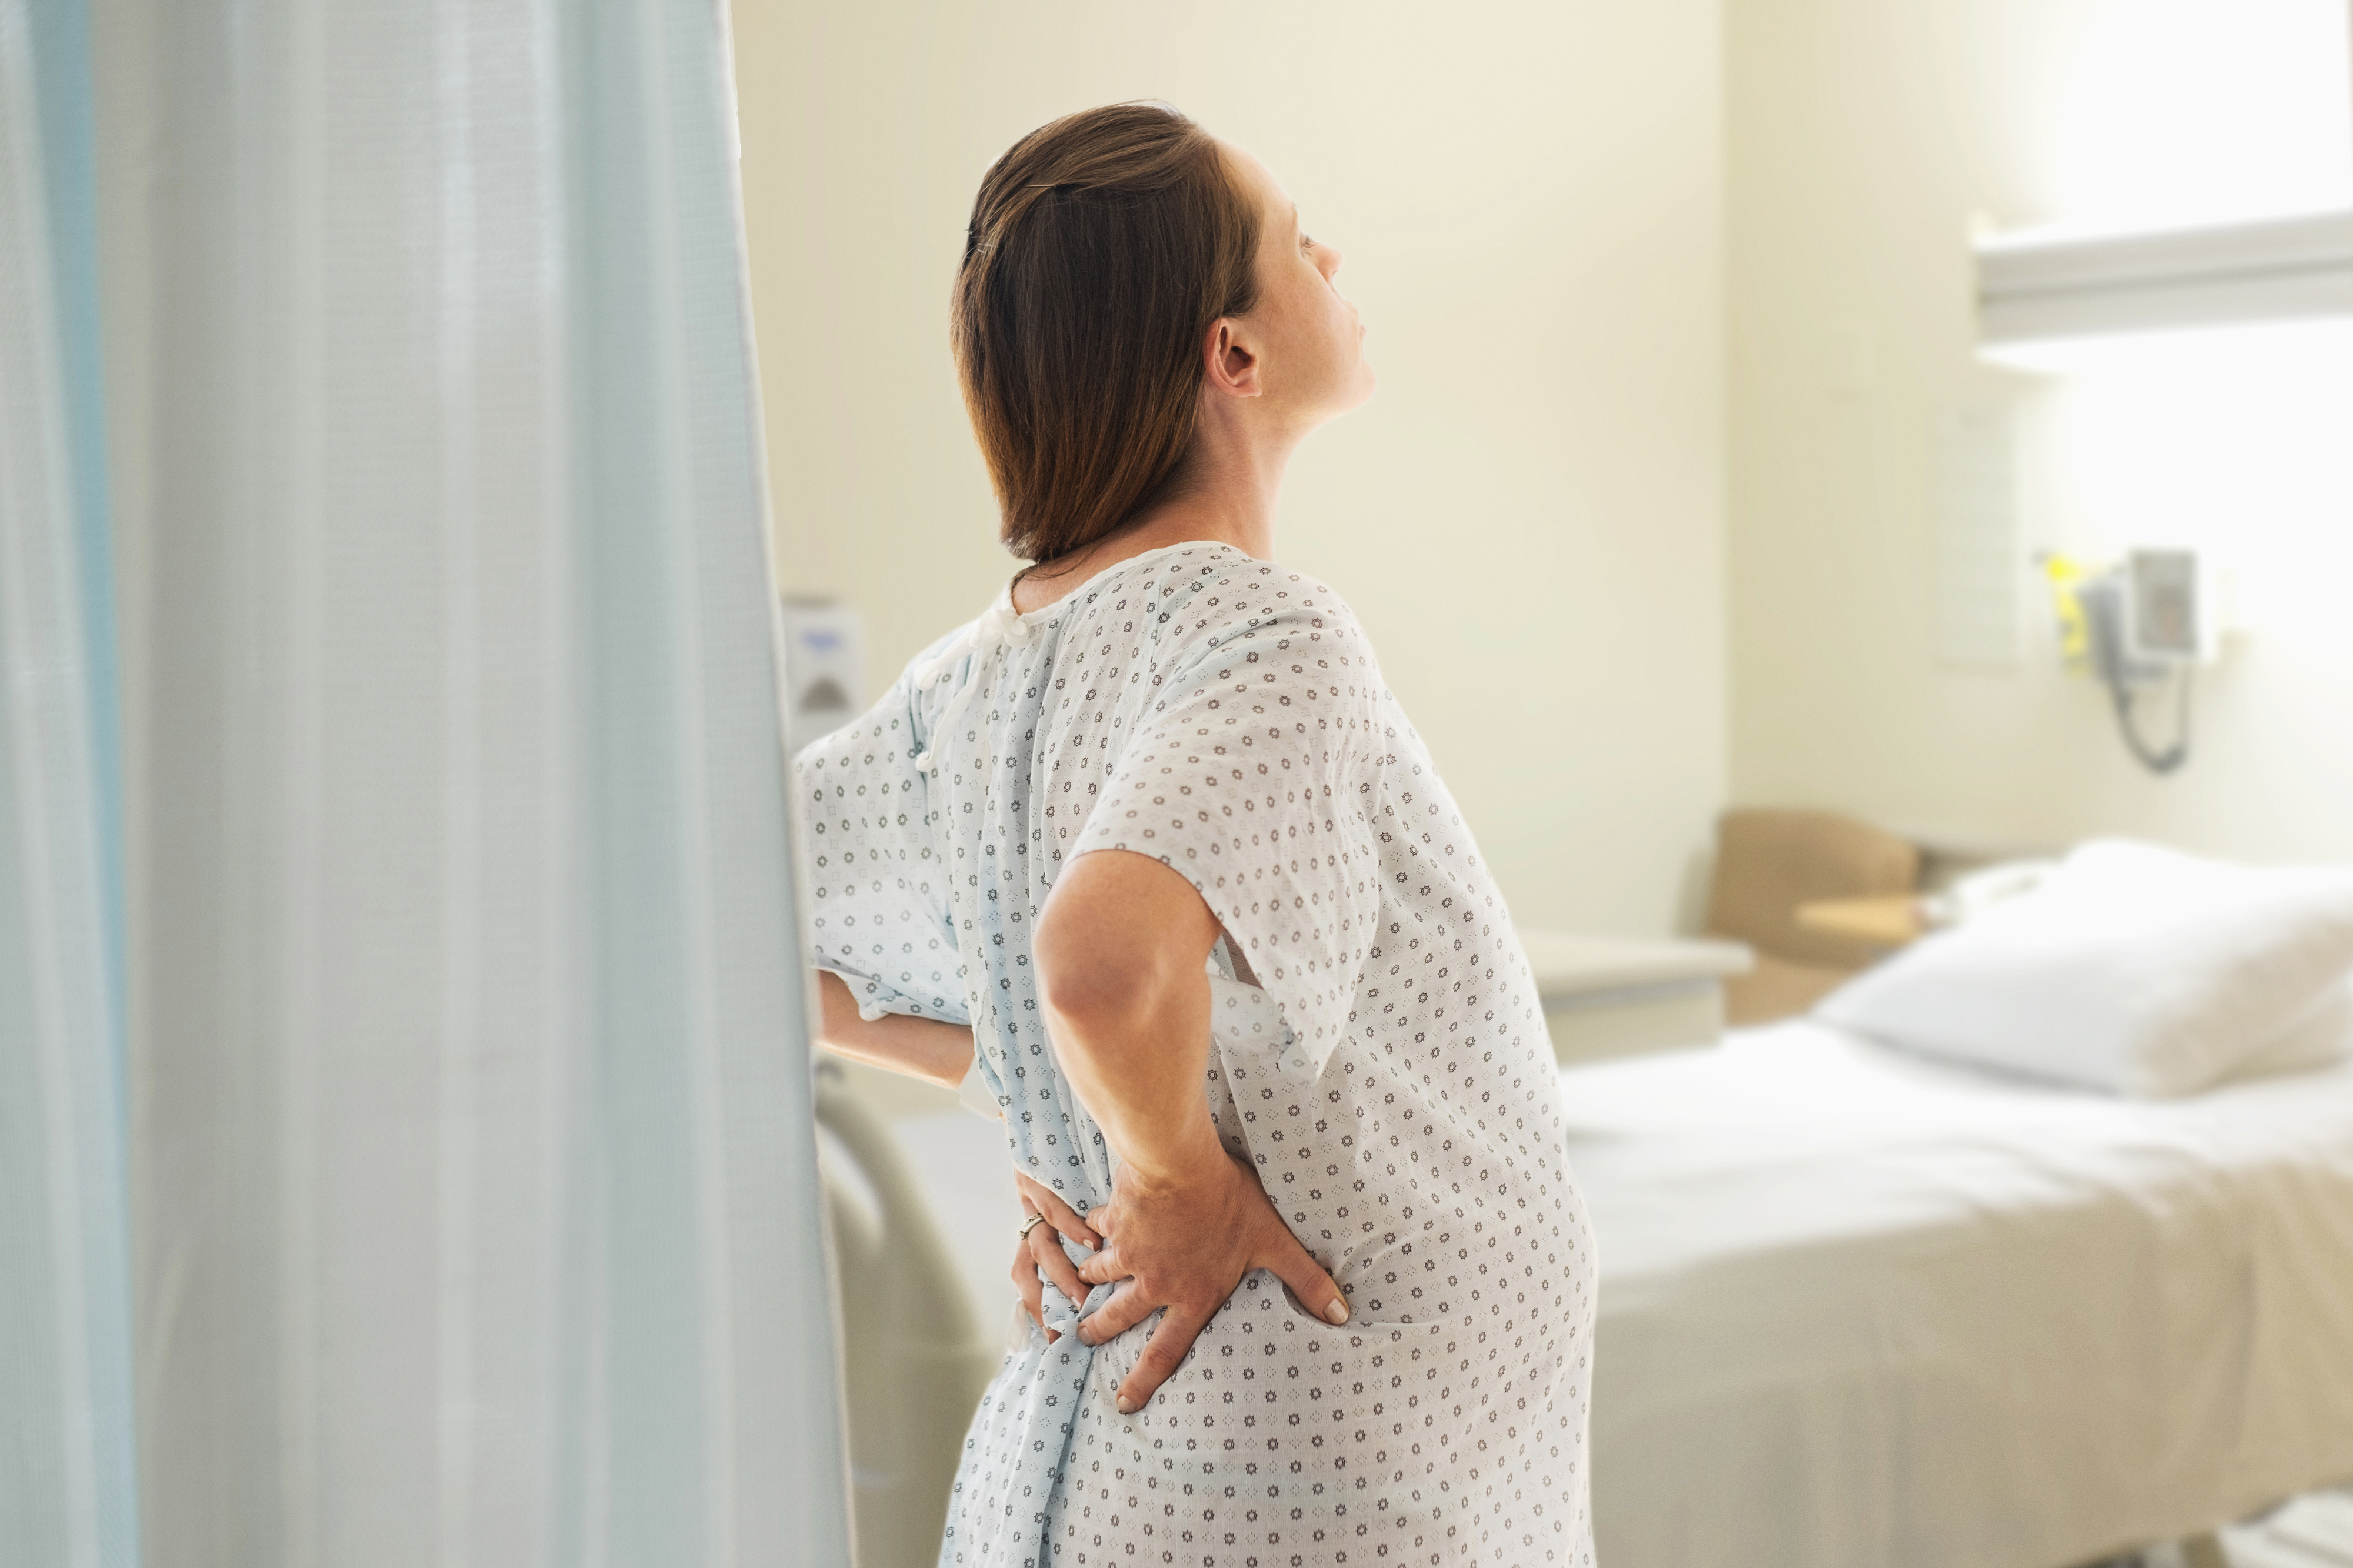 Pregnant person in a hospital gown standing by a curtain, hand on back, expressing discomfort